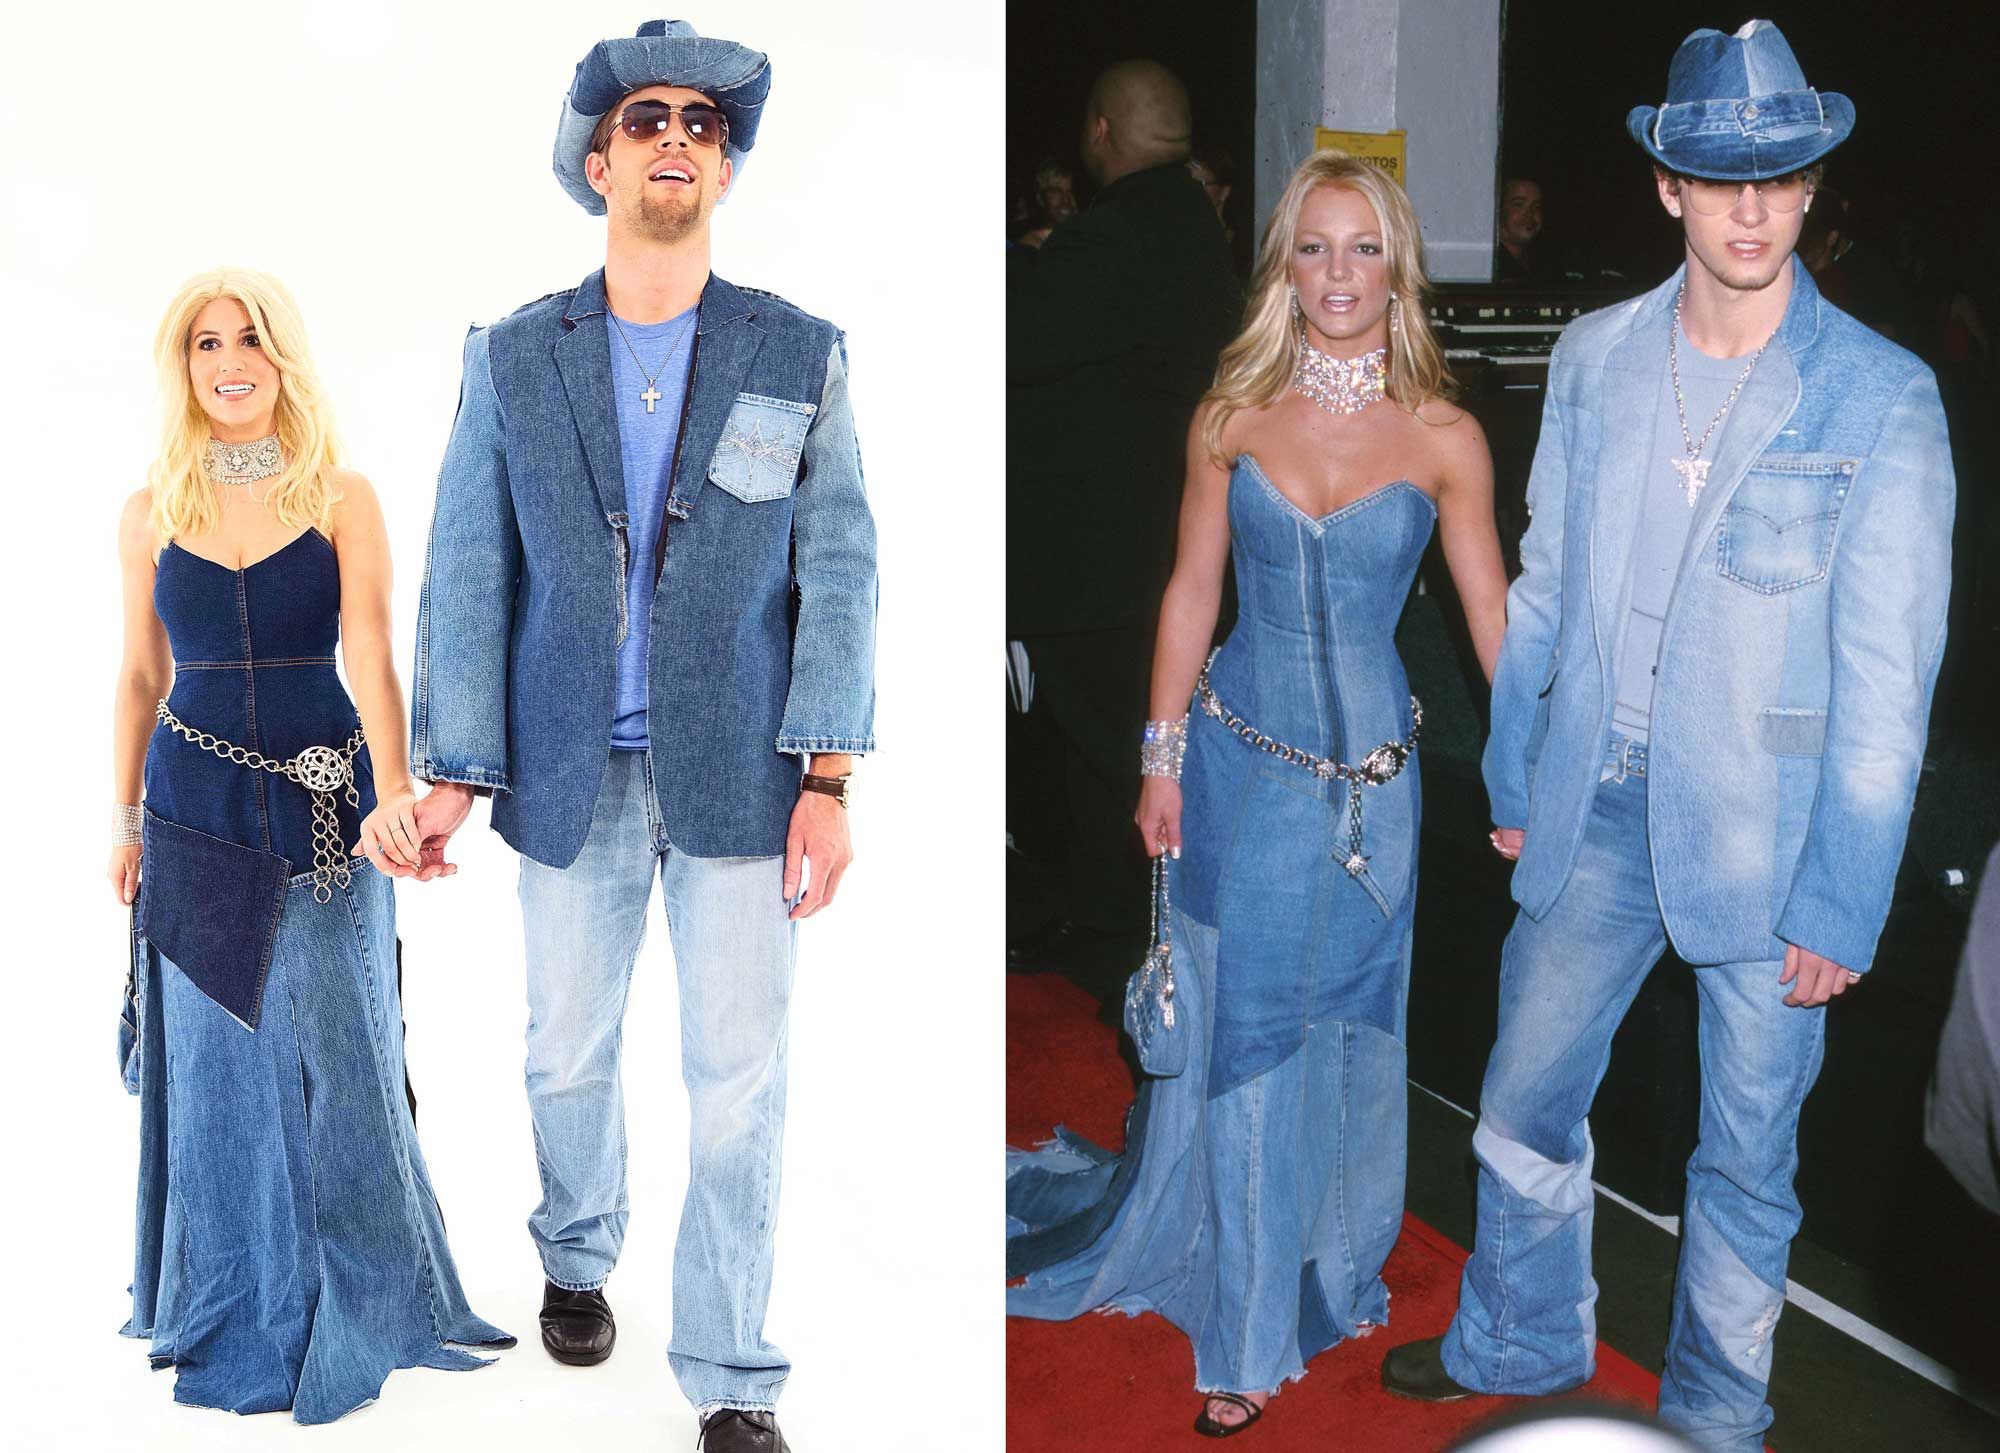 Kanye West and Julia Fox Look Just Like 2001 Britney Spears and Justin  Timberlake in Matching Denim Outfits